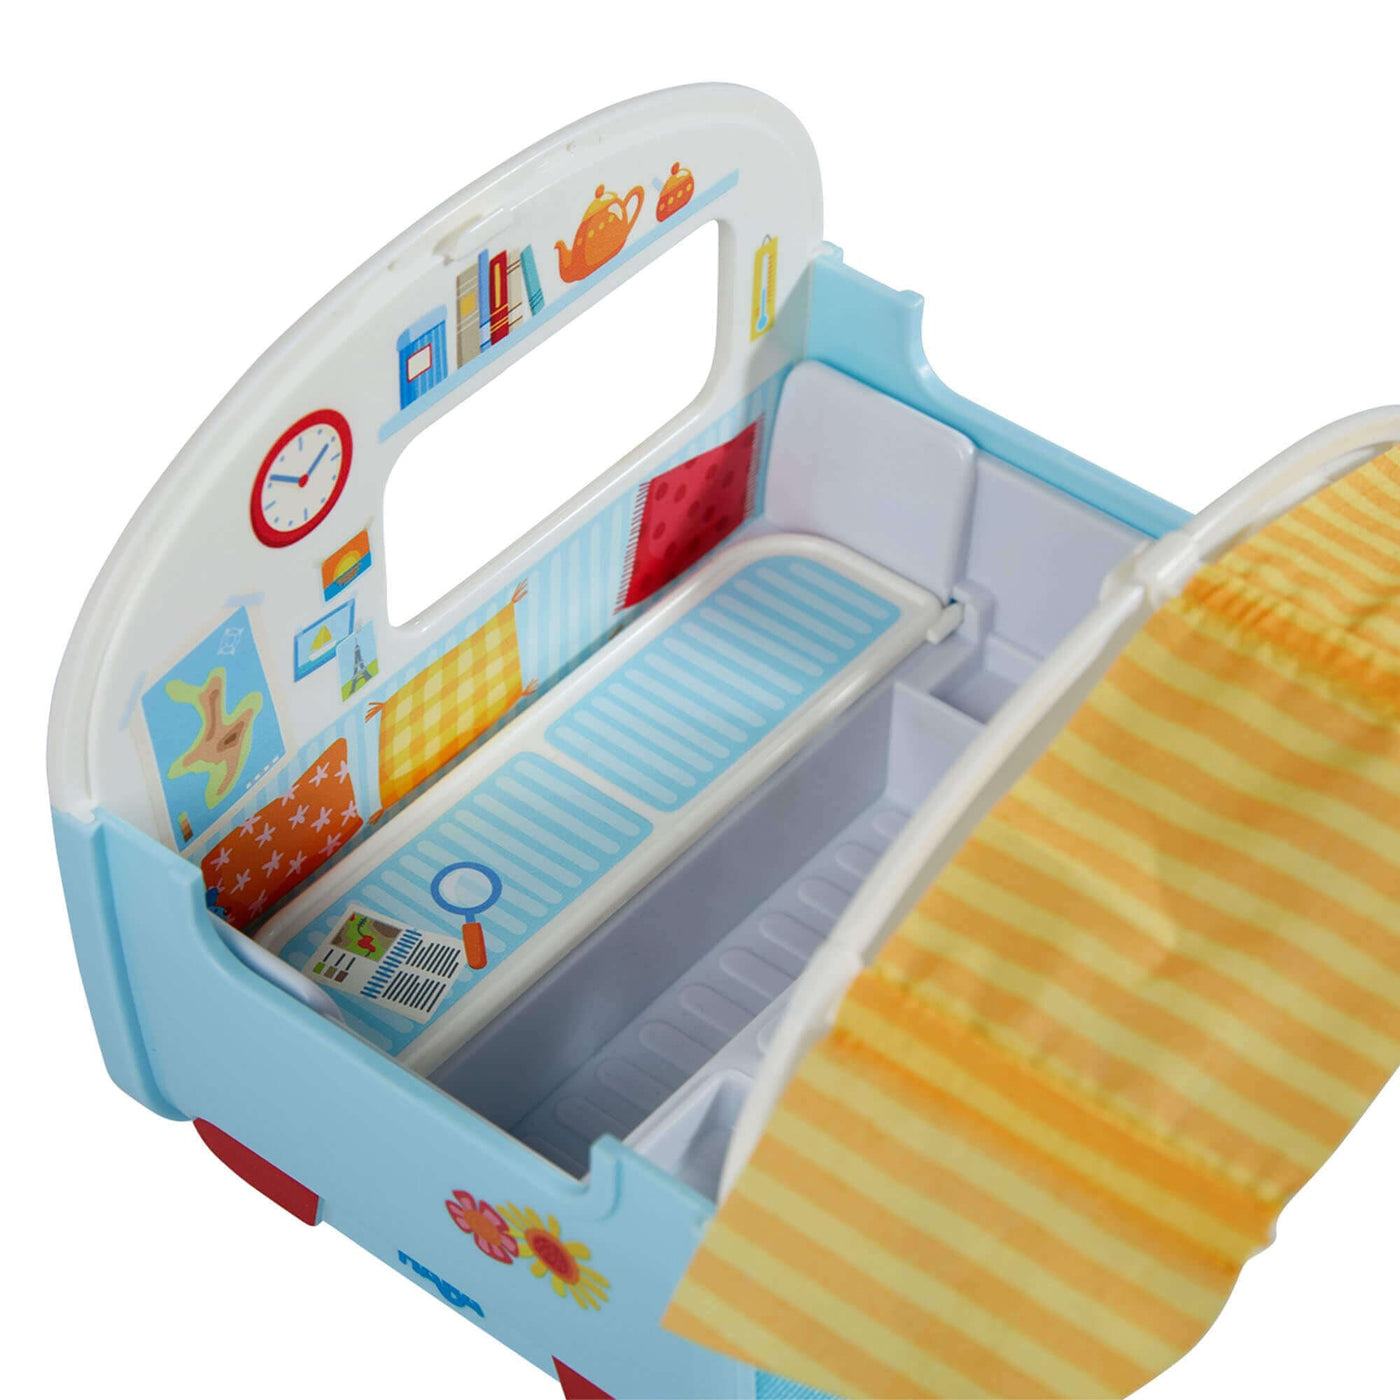 Little Friends Vacation Camper Play Set - HABA USA